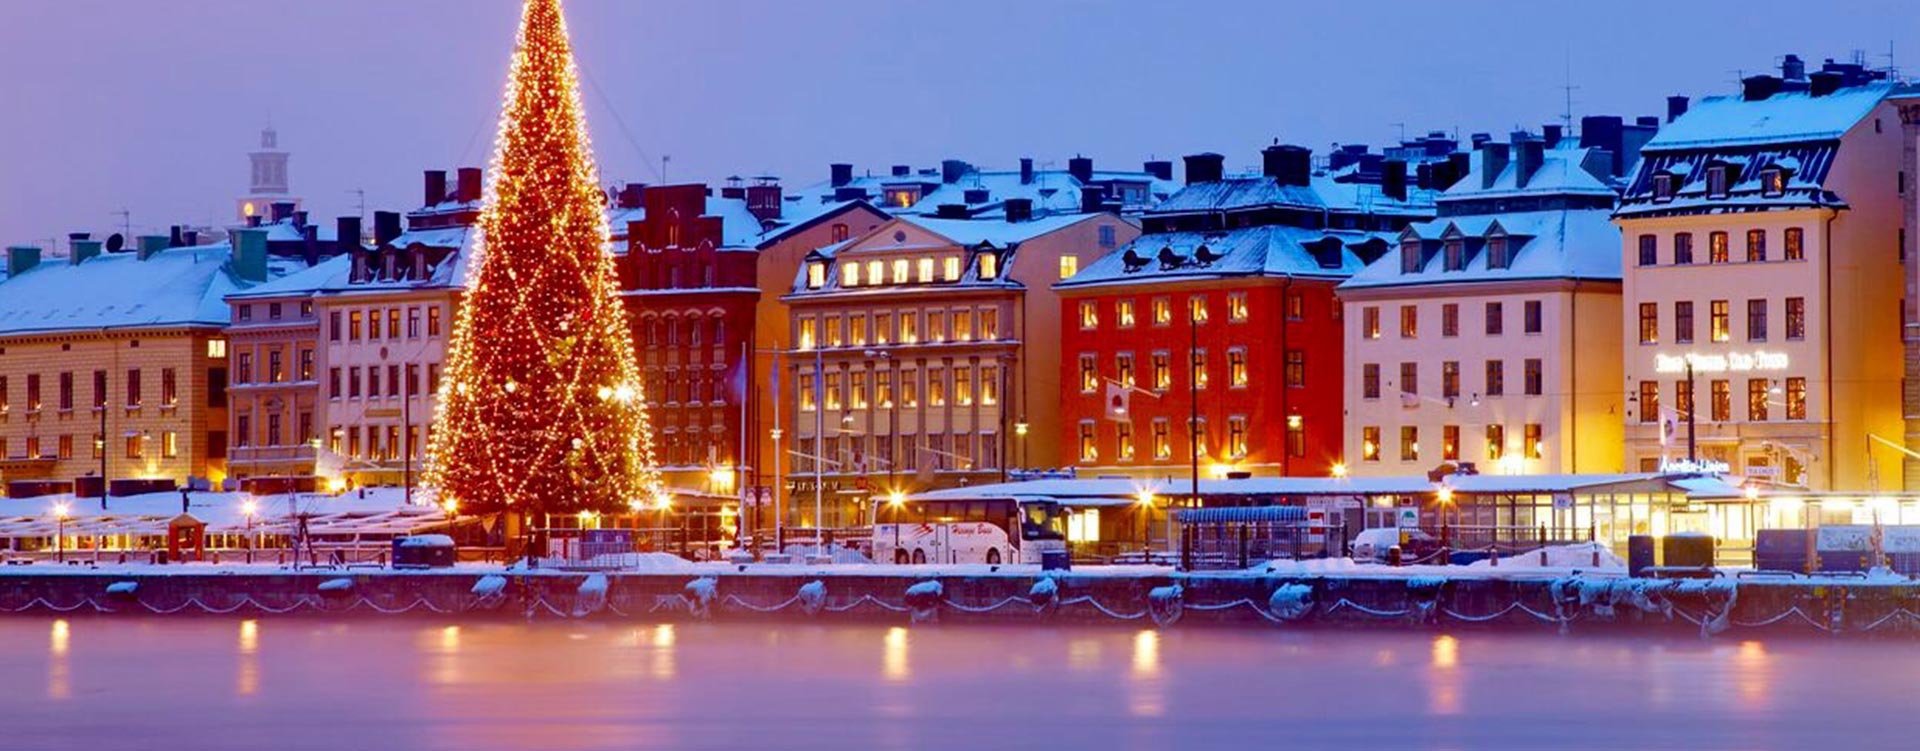 Stockholm business class deals transport travelers to a laid-back yachter’s dream island. - IFlyFirstClass